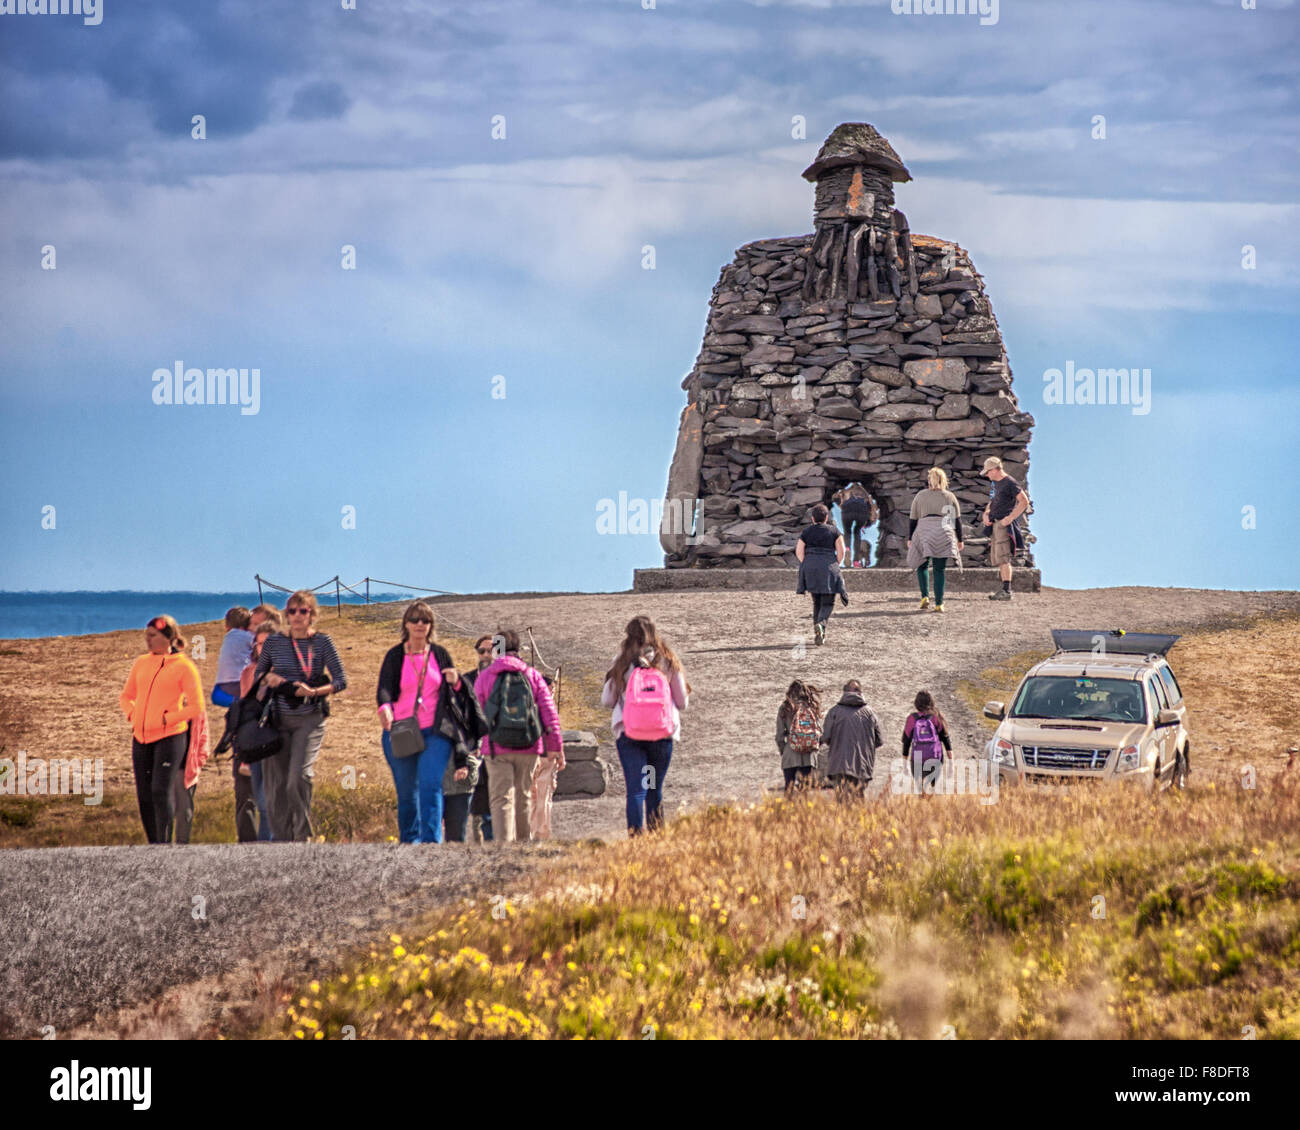 Arnarstapi, Snaefellsnes Peninsula, Iceland. 30th July, 2015. A group of tourists visit the huge stone structure of Bardur SnaefellsÃ¡s at Arnarstapi on the Snaefellsnes peninsula in West Iceland. By sculptor Ragnar Kjartansson, it relates to a late Icelander saga with legendary elements dating to the early 14th century. It is a favorite tourist destination. © Arnold Drapkin/ZUMA Wire/Alamy Live News Stock Photo